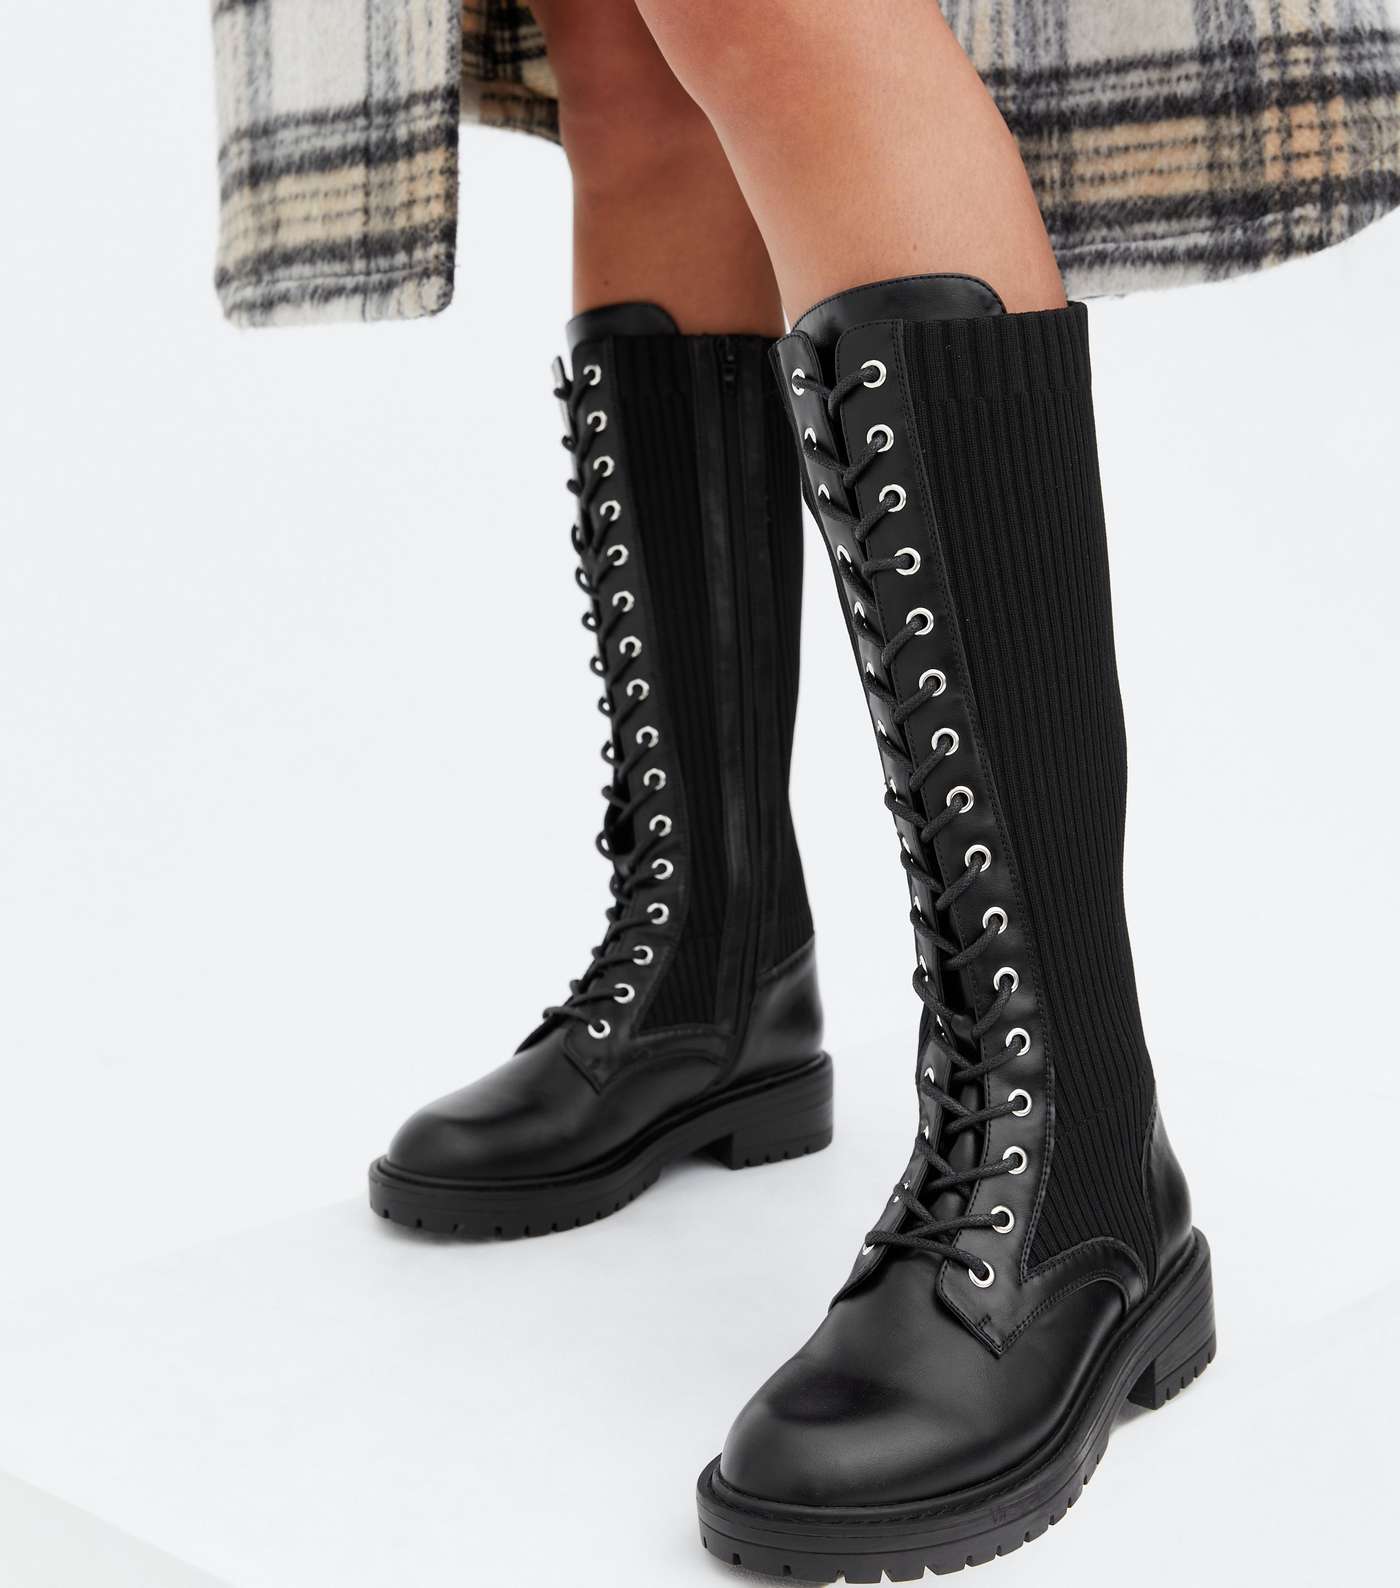 Wide Fit Black Knit Lace Up Knee High Boots Image 2